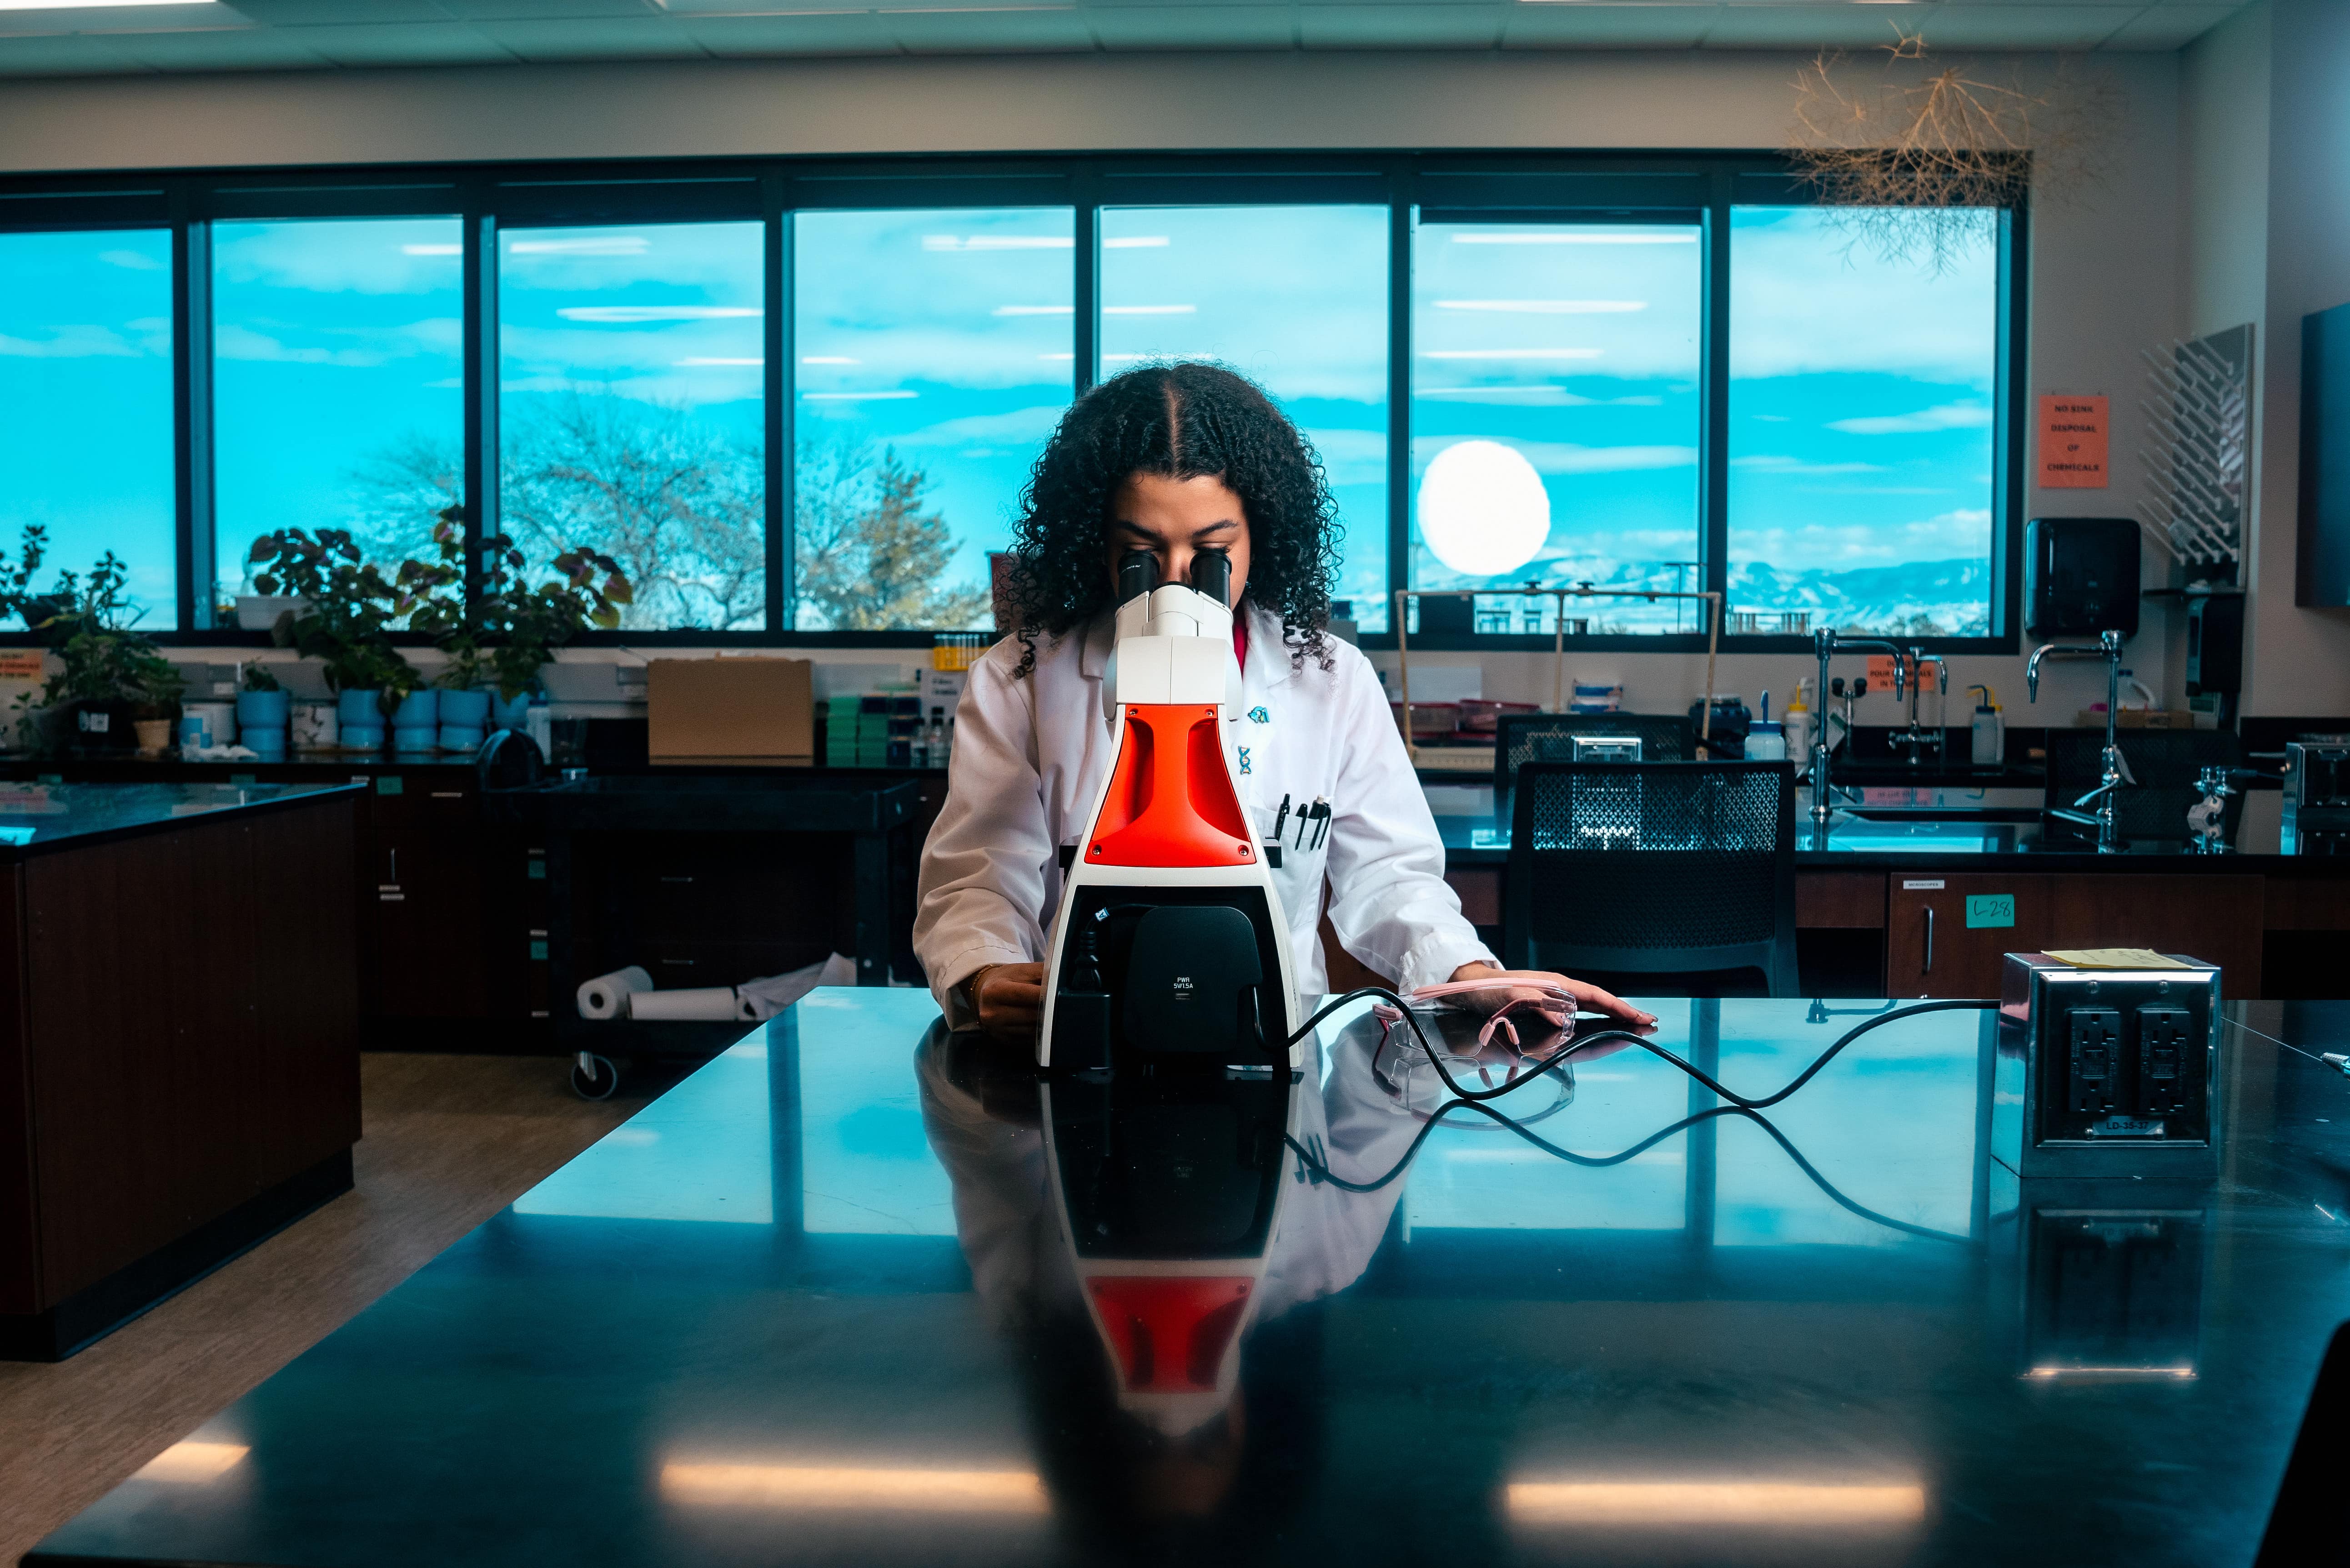 A student wears a lab coat and looks into a microscope. Mountains can be seen through the wall of windows in the background.